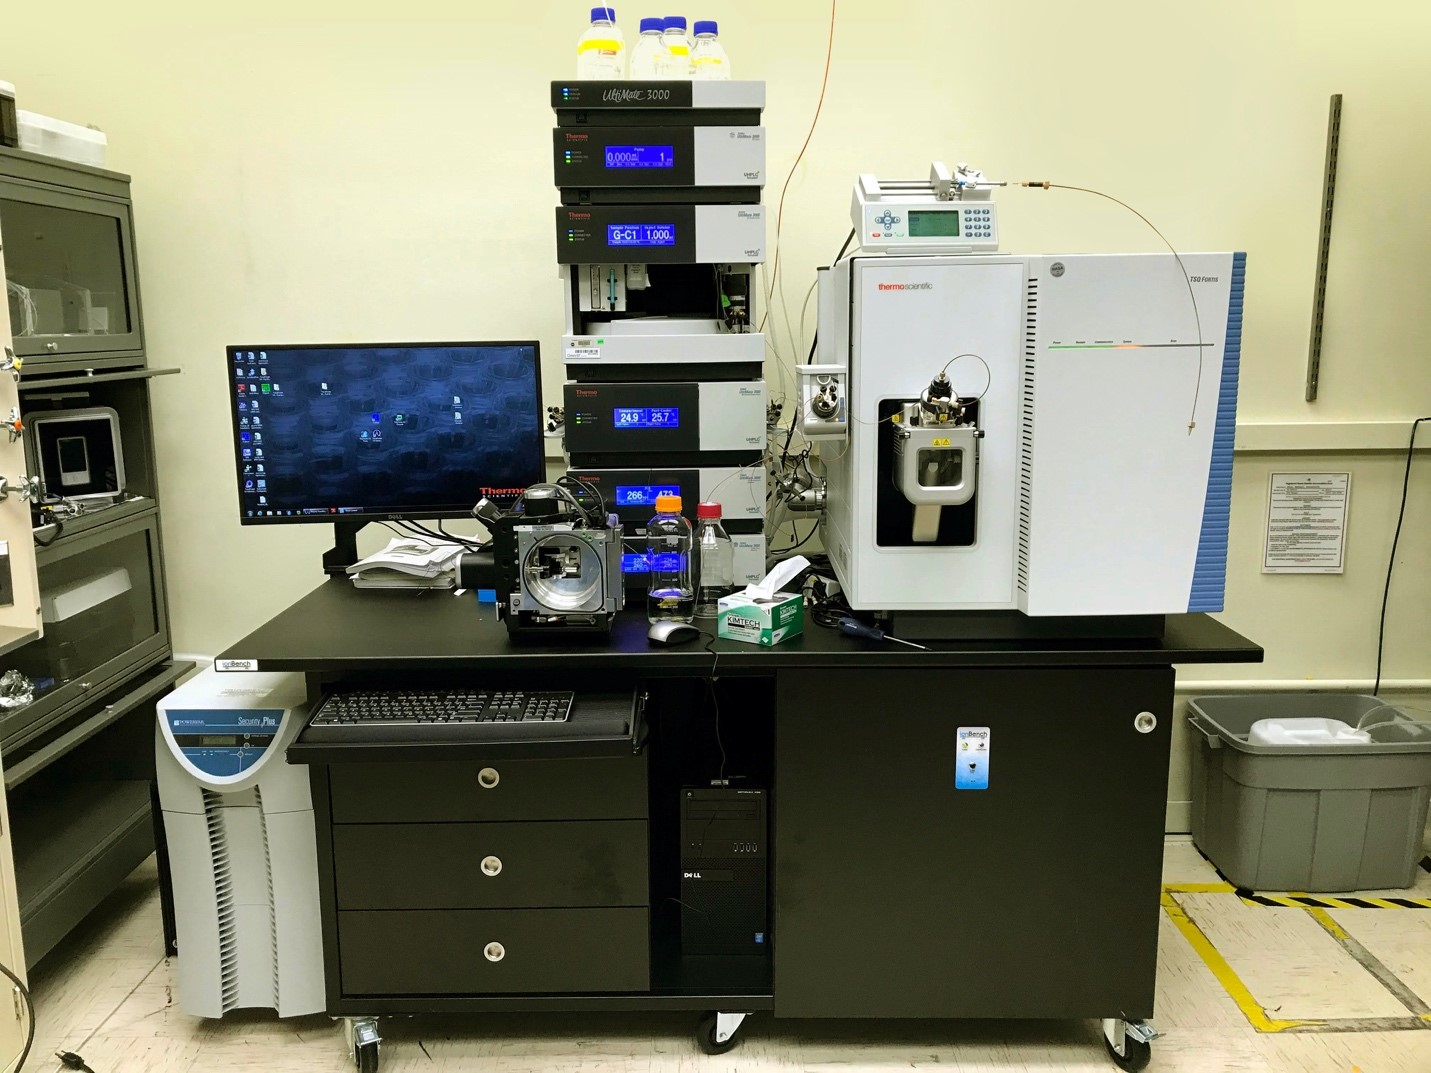 UPLC-QqQ-MS: This liquid chromatograph is connected to fluorescence, 
					photodiode array, along with triple quadrupole mass spectrometer detectors, enabling 
					analysis of polar and semi-polar compounds up to 4,000 m/z.